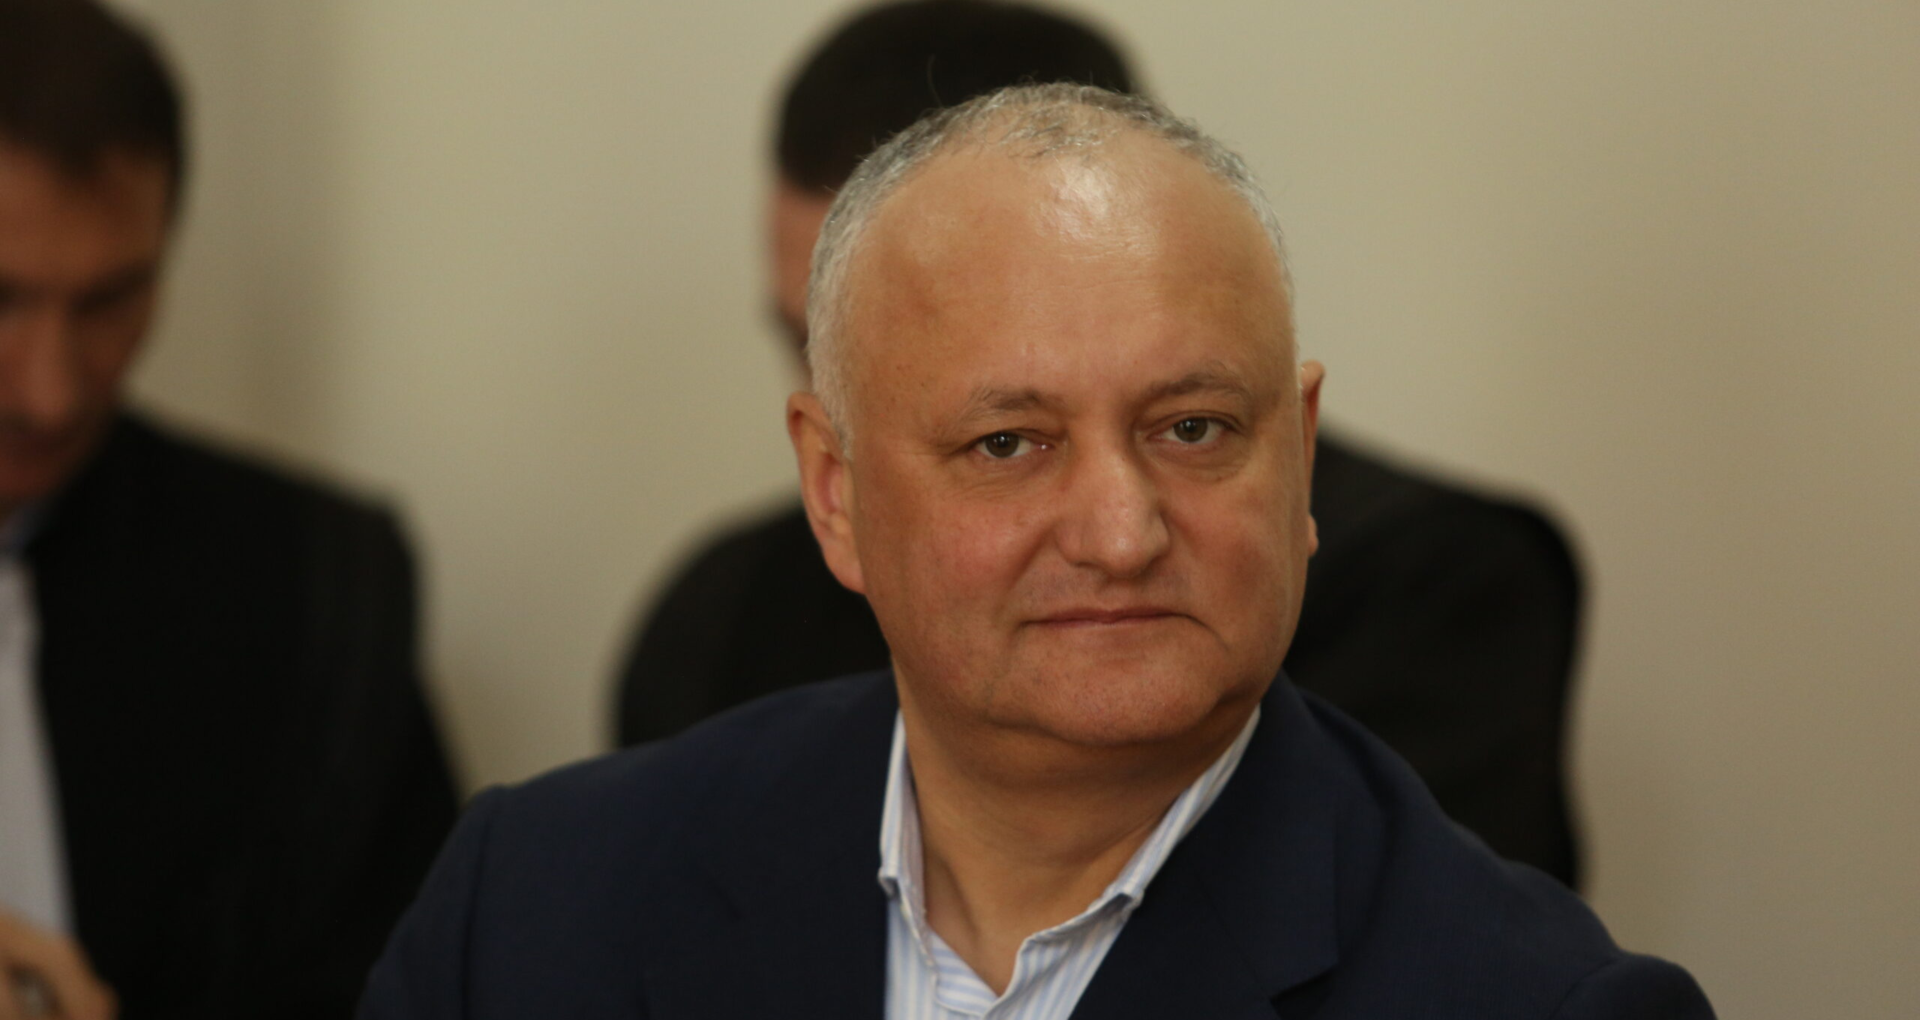 The “kuliok” case: after 13 court sessions, anti-corruption prosecutors began presenting evidence in support of the charges against socialist Igor Dodon